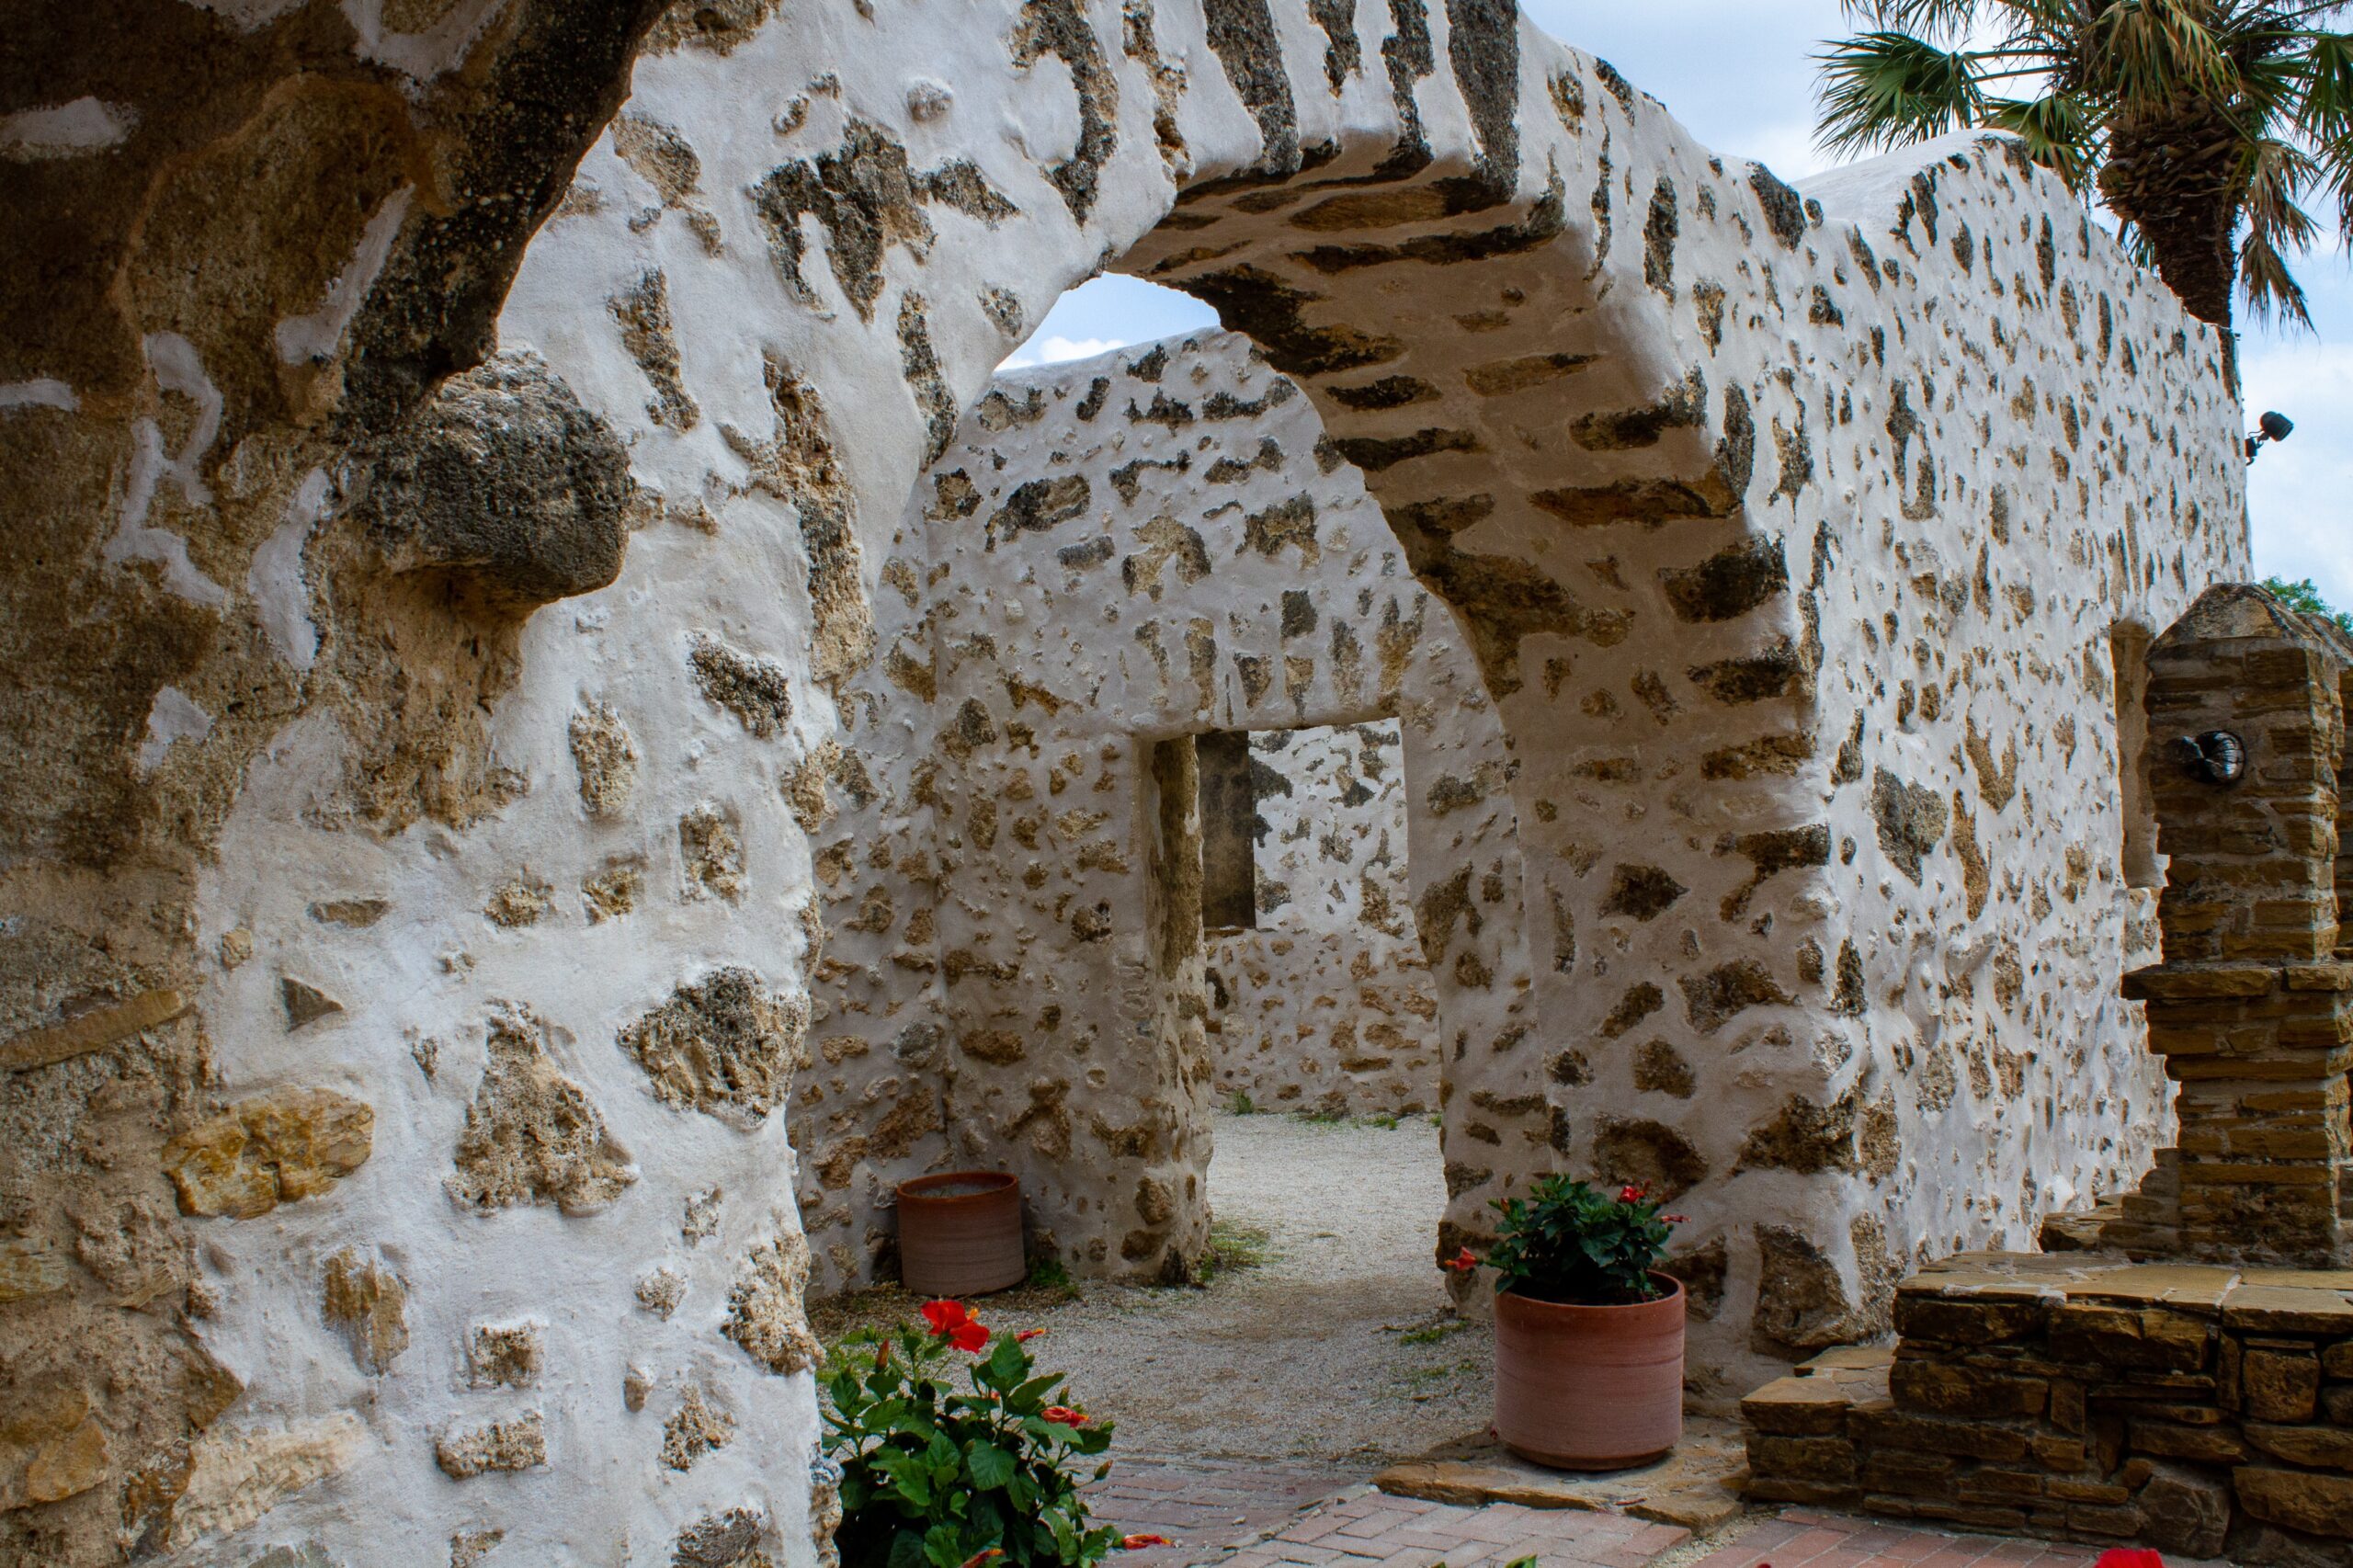 The arches and dome of the old church in the San Jose Missions in San Antonio can be seen